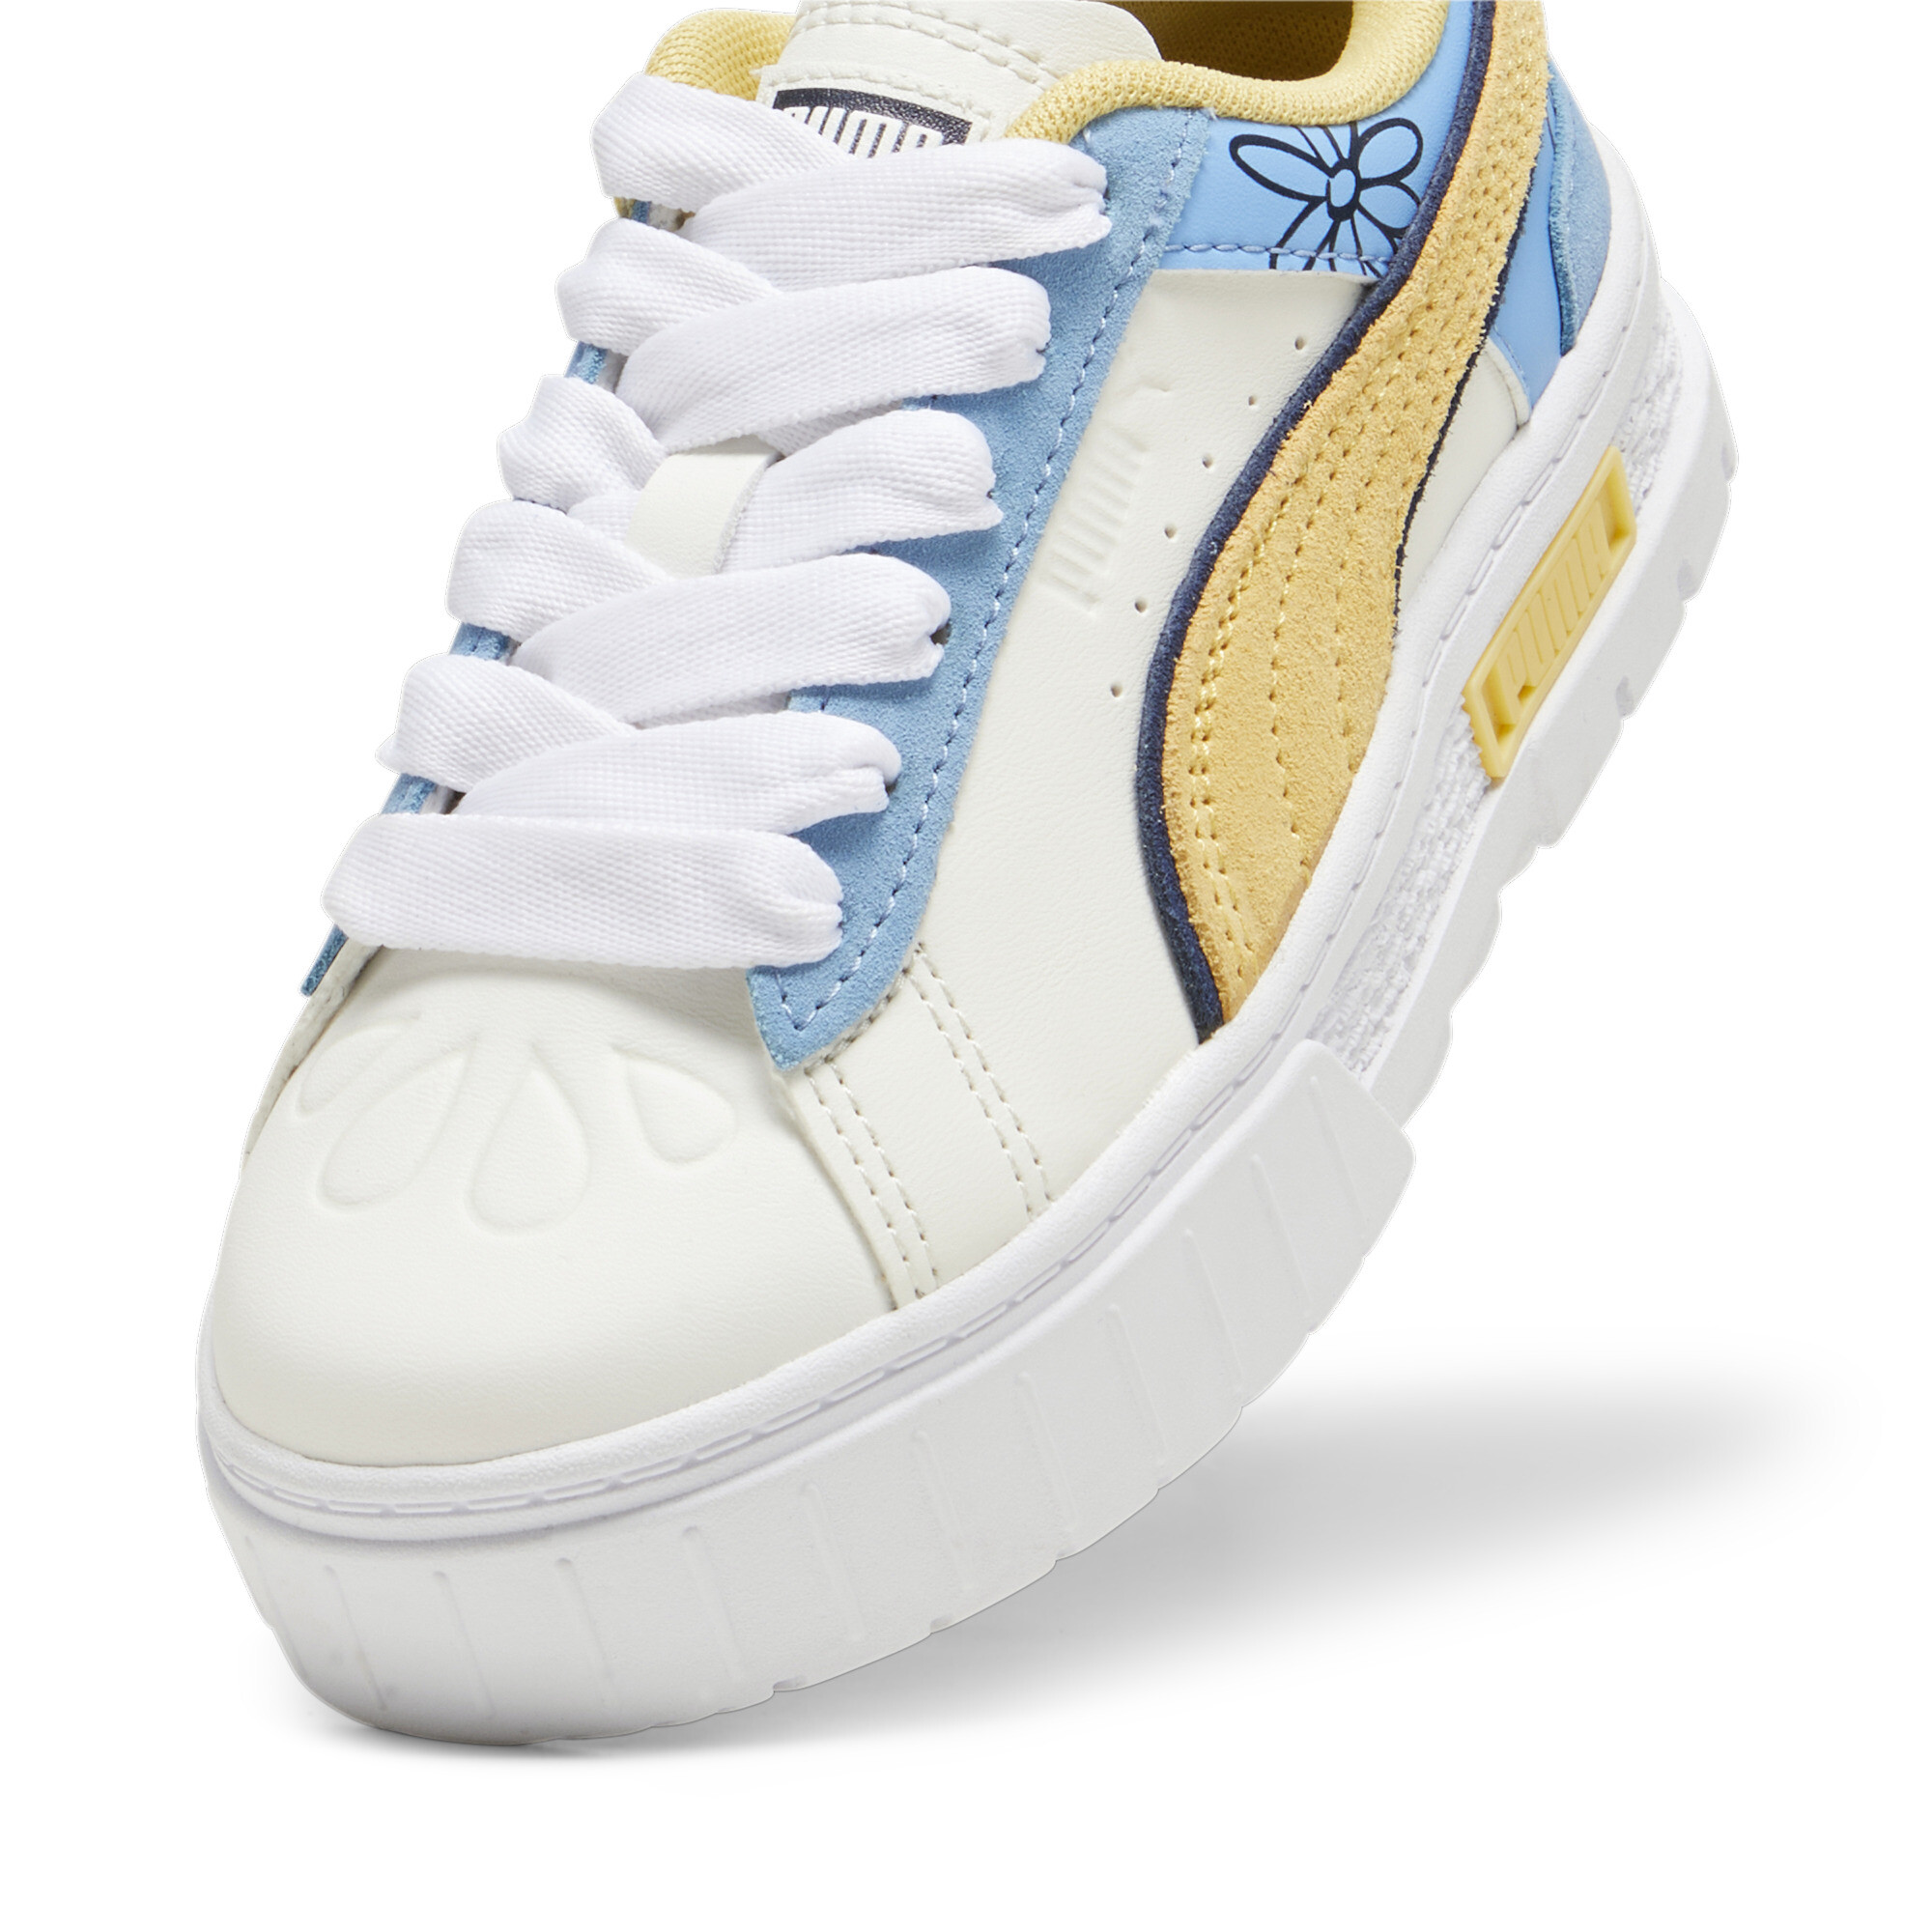 Puma X THE SMURFS Mayze Kids' Sneakers, White, Size 28, Shoes